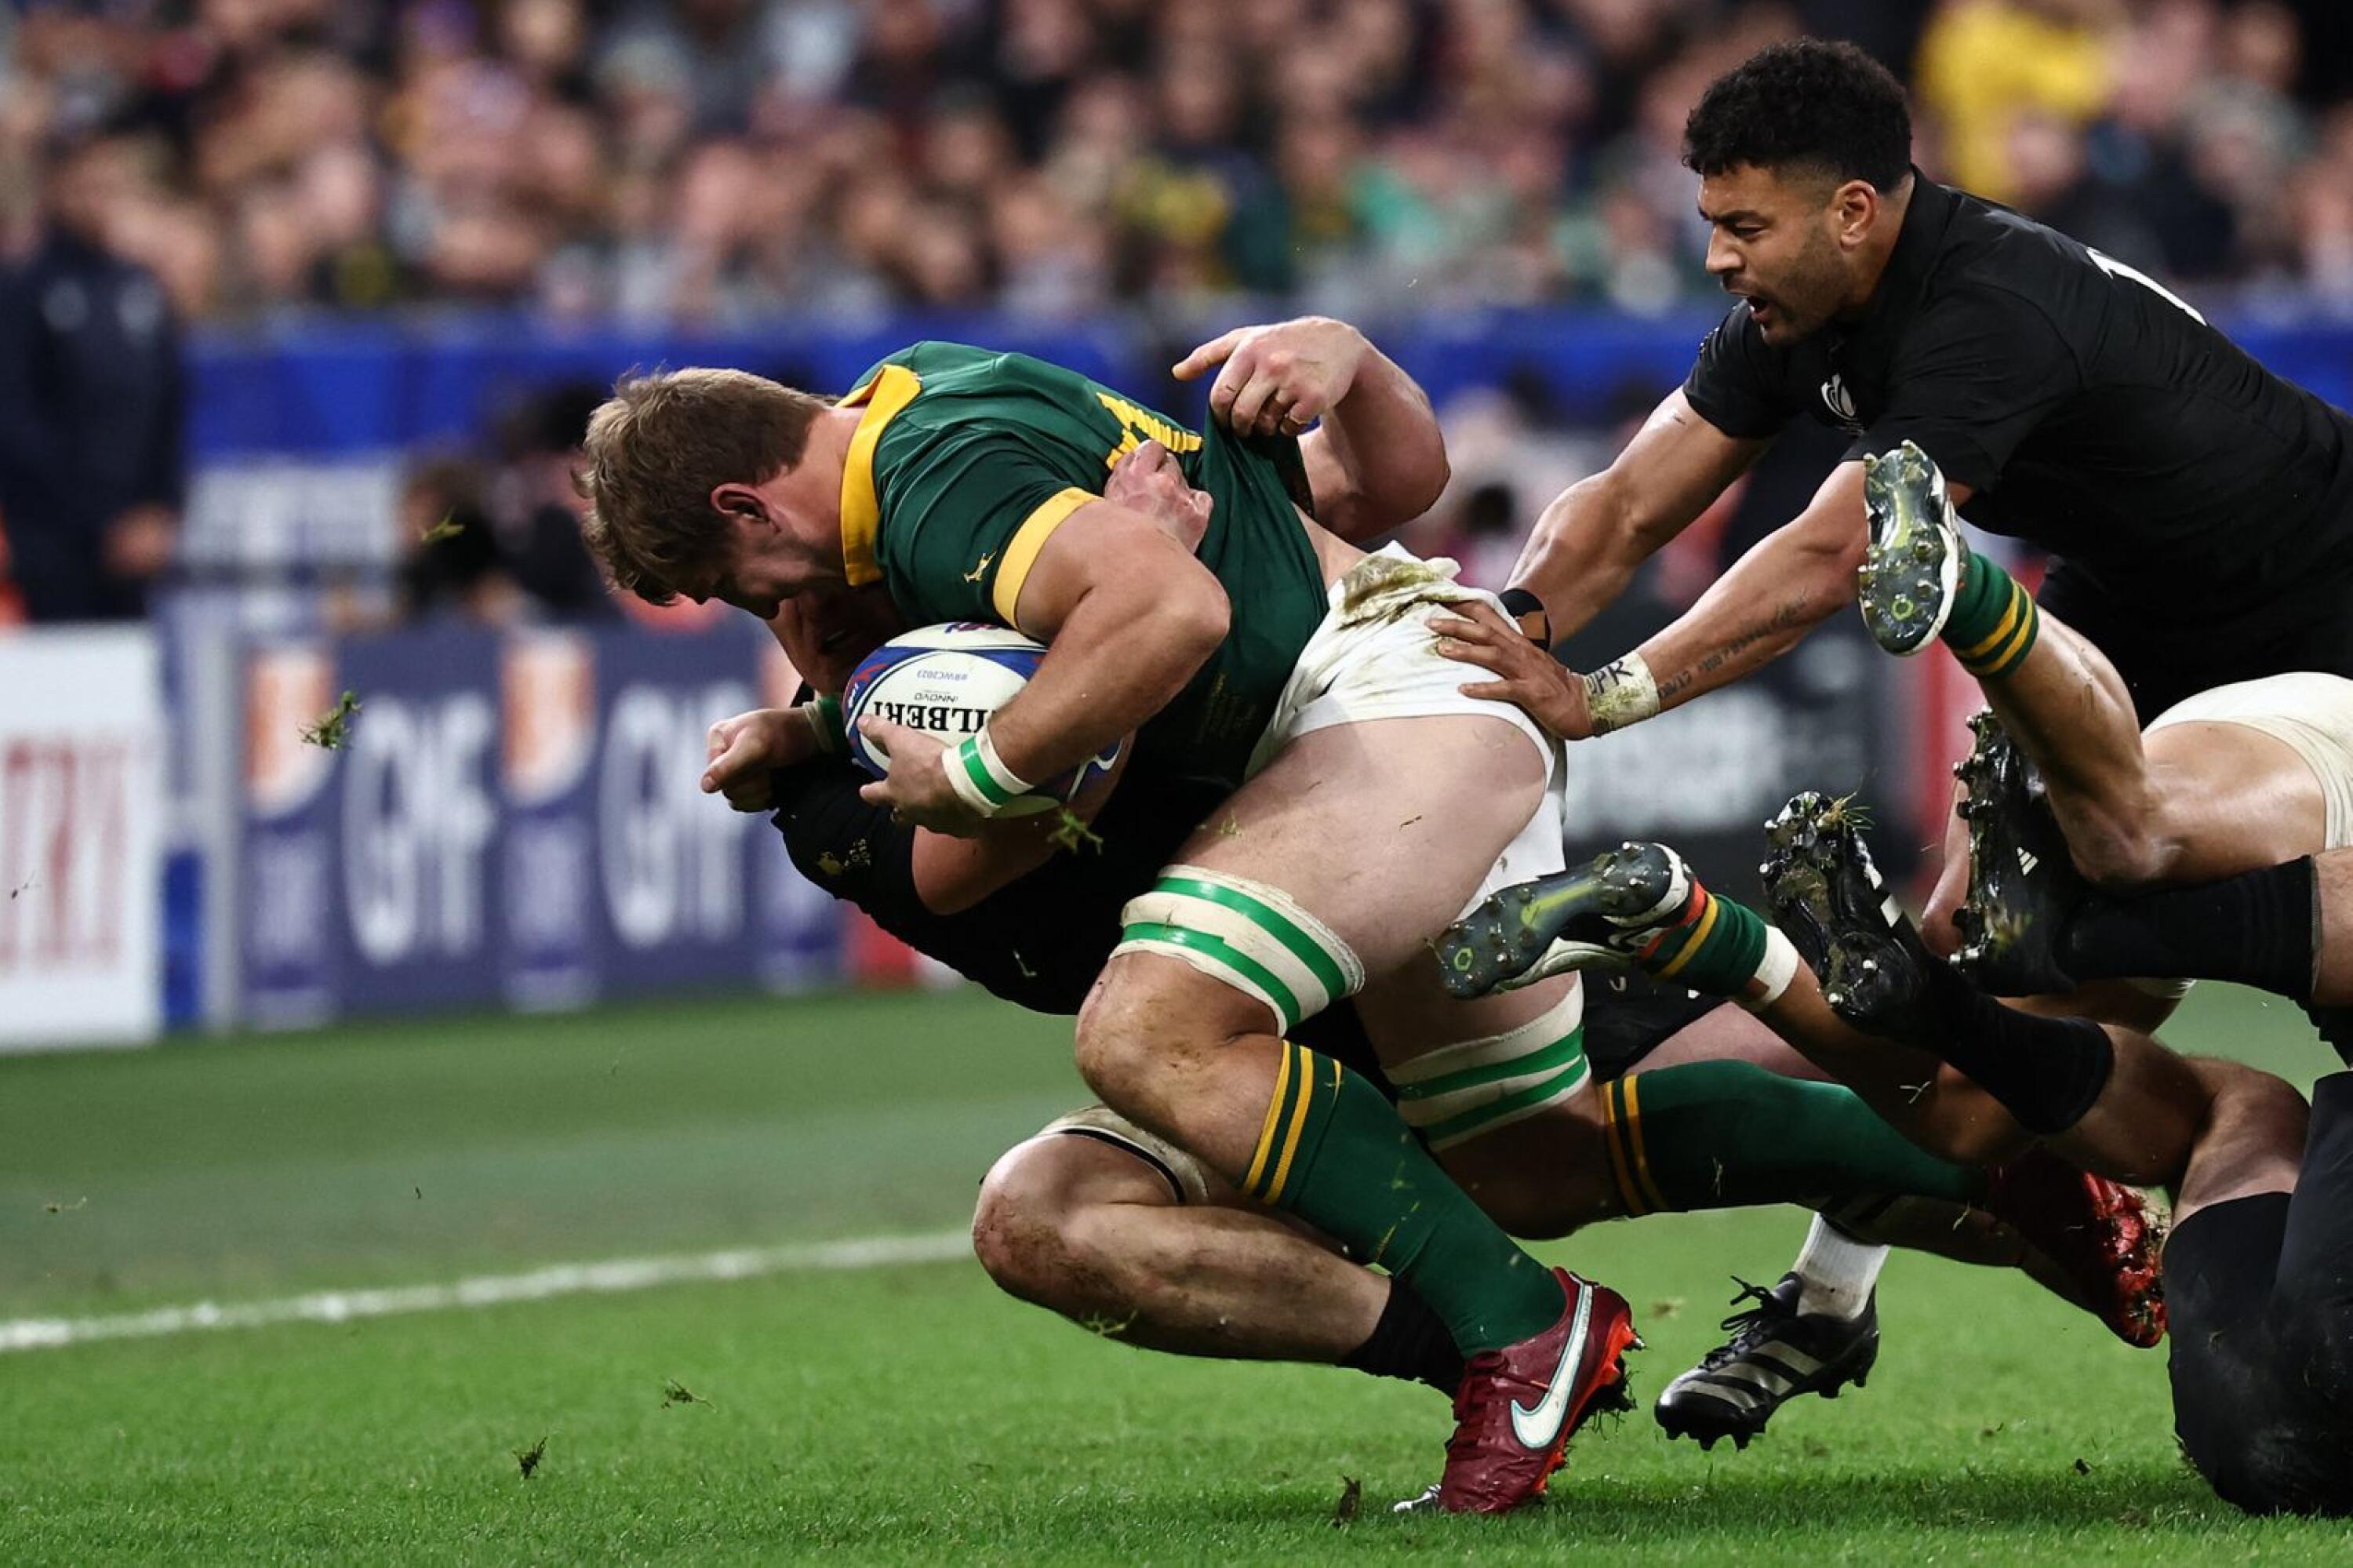 South Africa's flanker Kwagga Smith is tackled during the Rugby World Cup Final against New Zealand at the Stade de France in Saint-Denis on Saturday